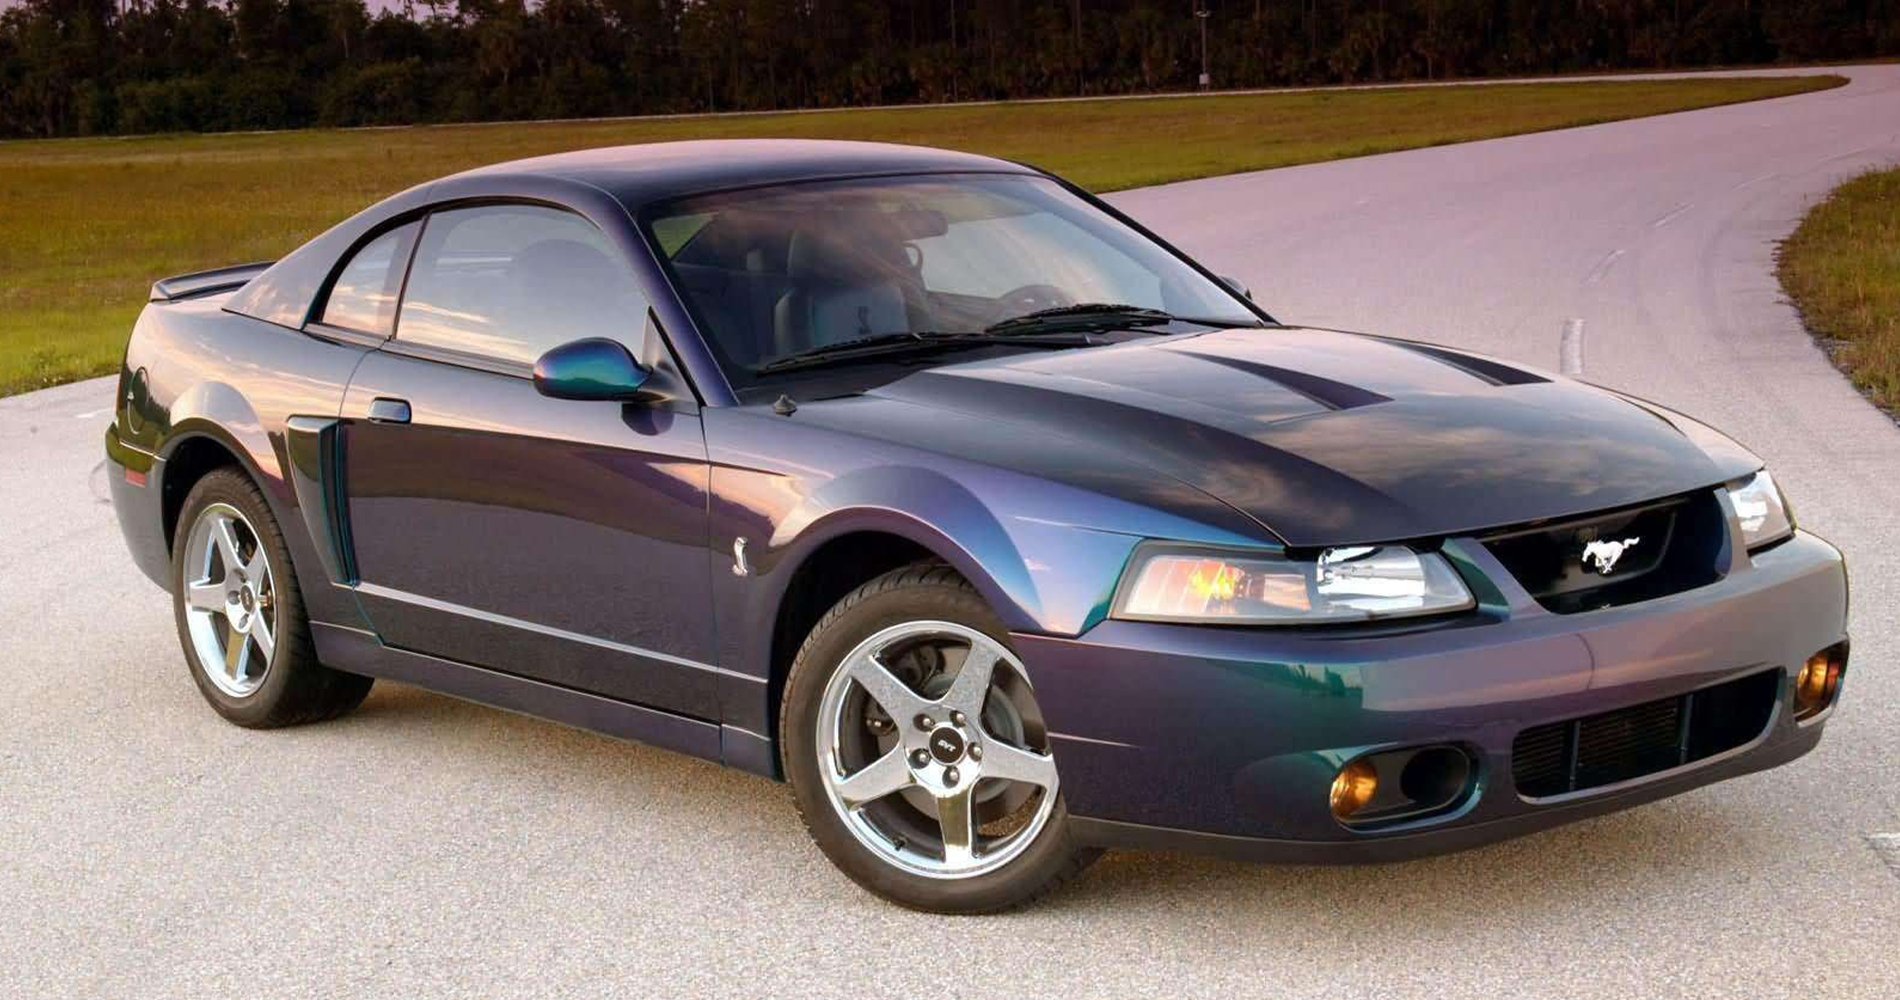 Fourth gen blue Ford Mustang Cobra on a test track